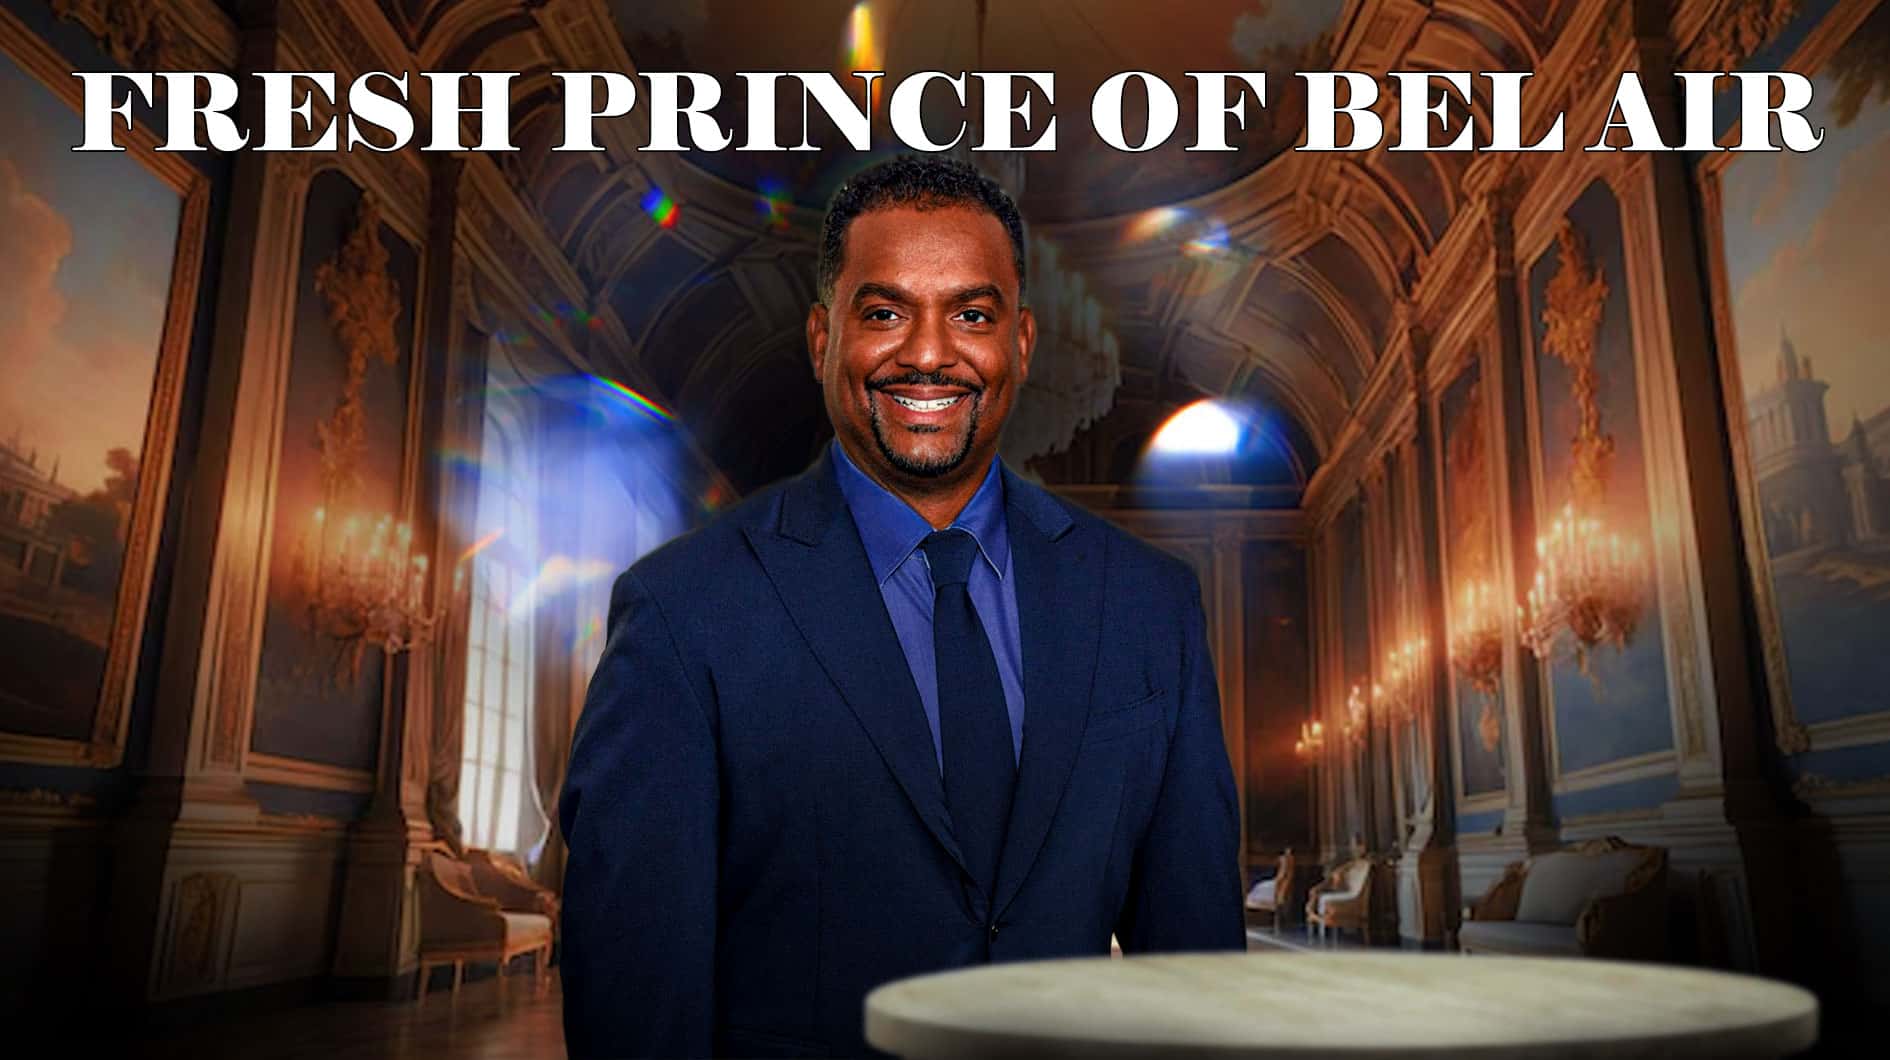 Alfonso Ribeiro gets honest on how Fresh Prince of Bel-Air demolished his acting career